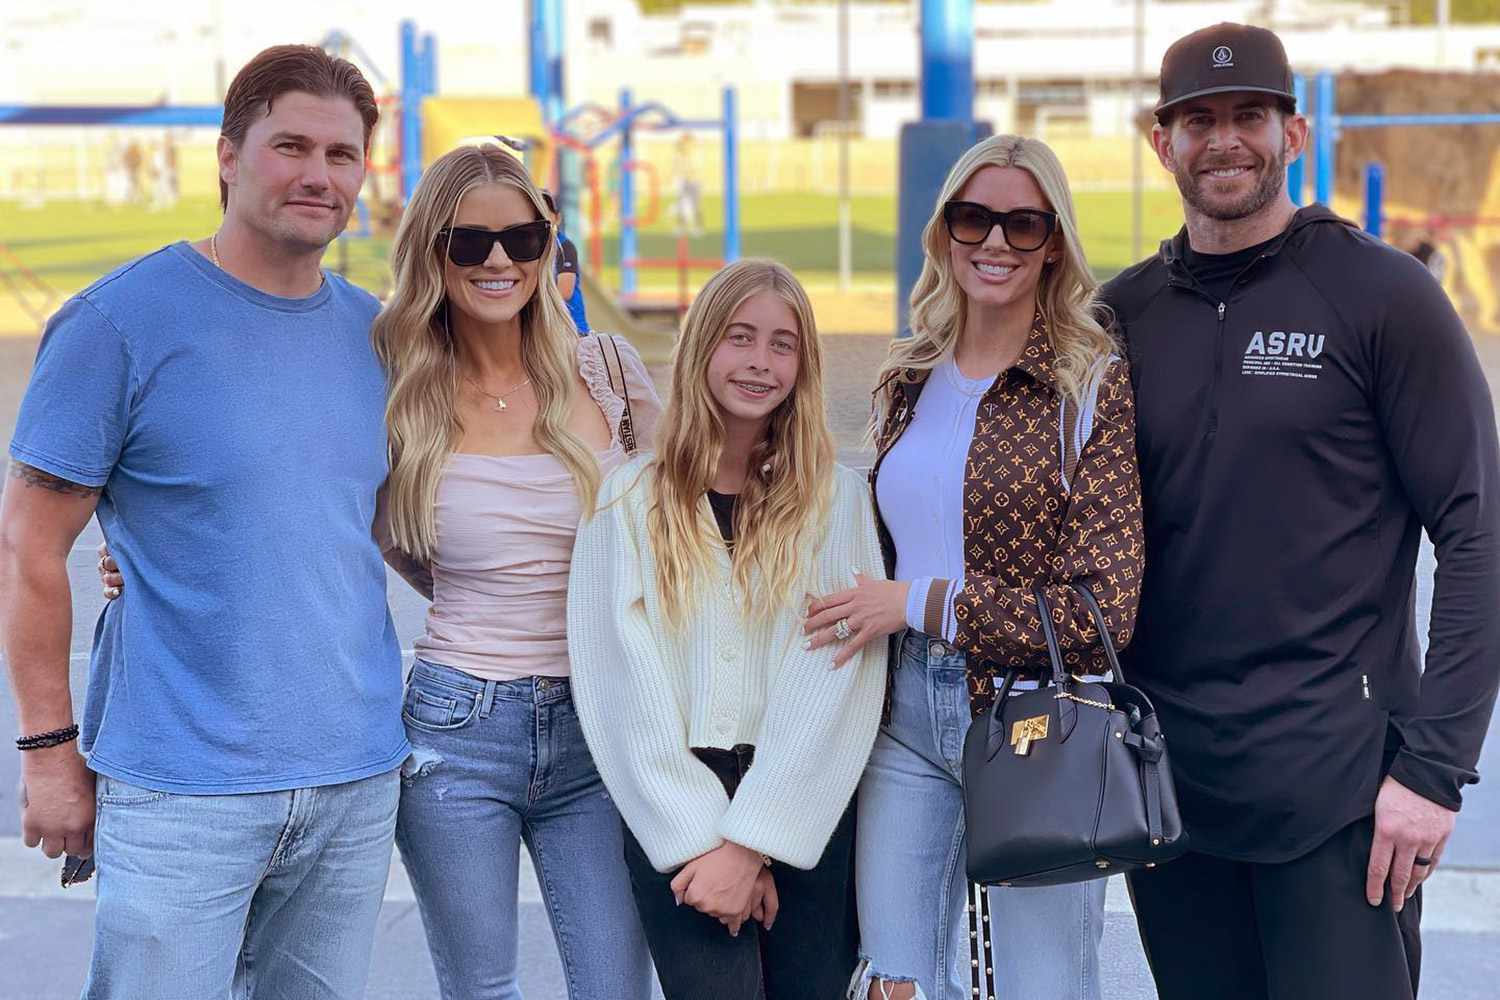 https://www.instagram.com/p/CdevCzurO1u/ hed: Tarek El Mousa and Christina Hall Put on a United Front in a Family Photo Featuring New Spouses After Public Spat